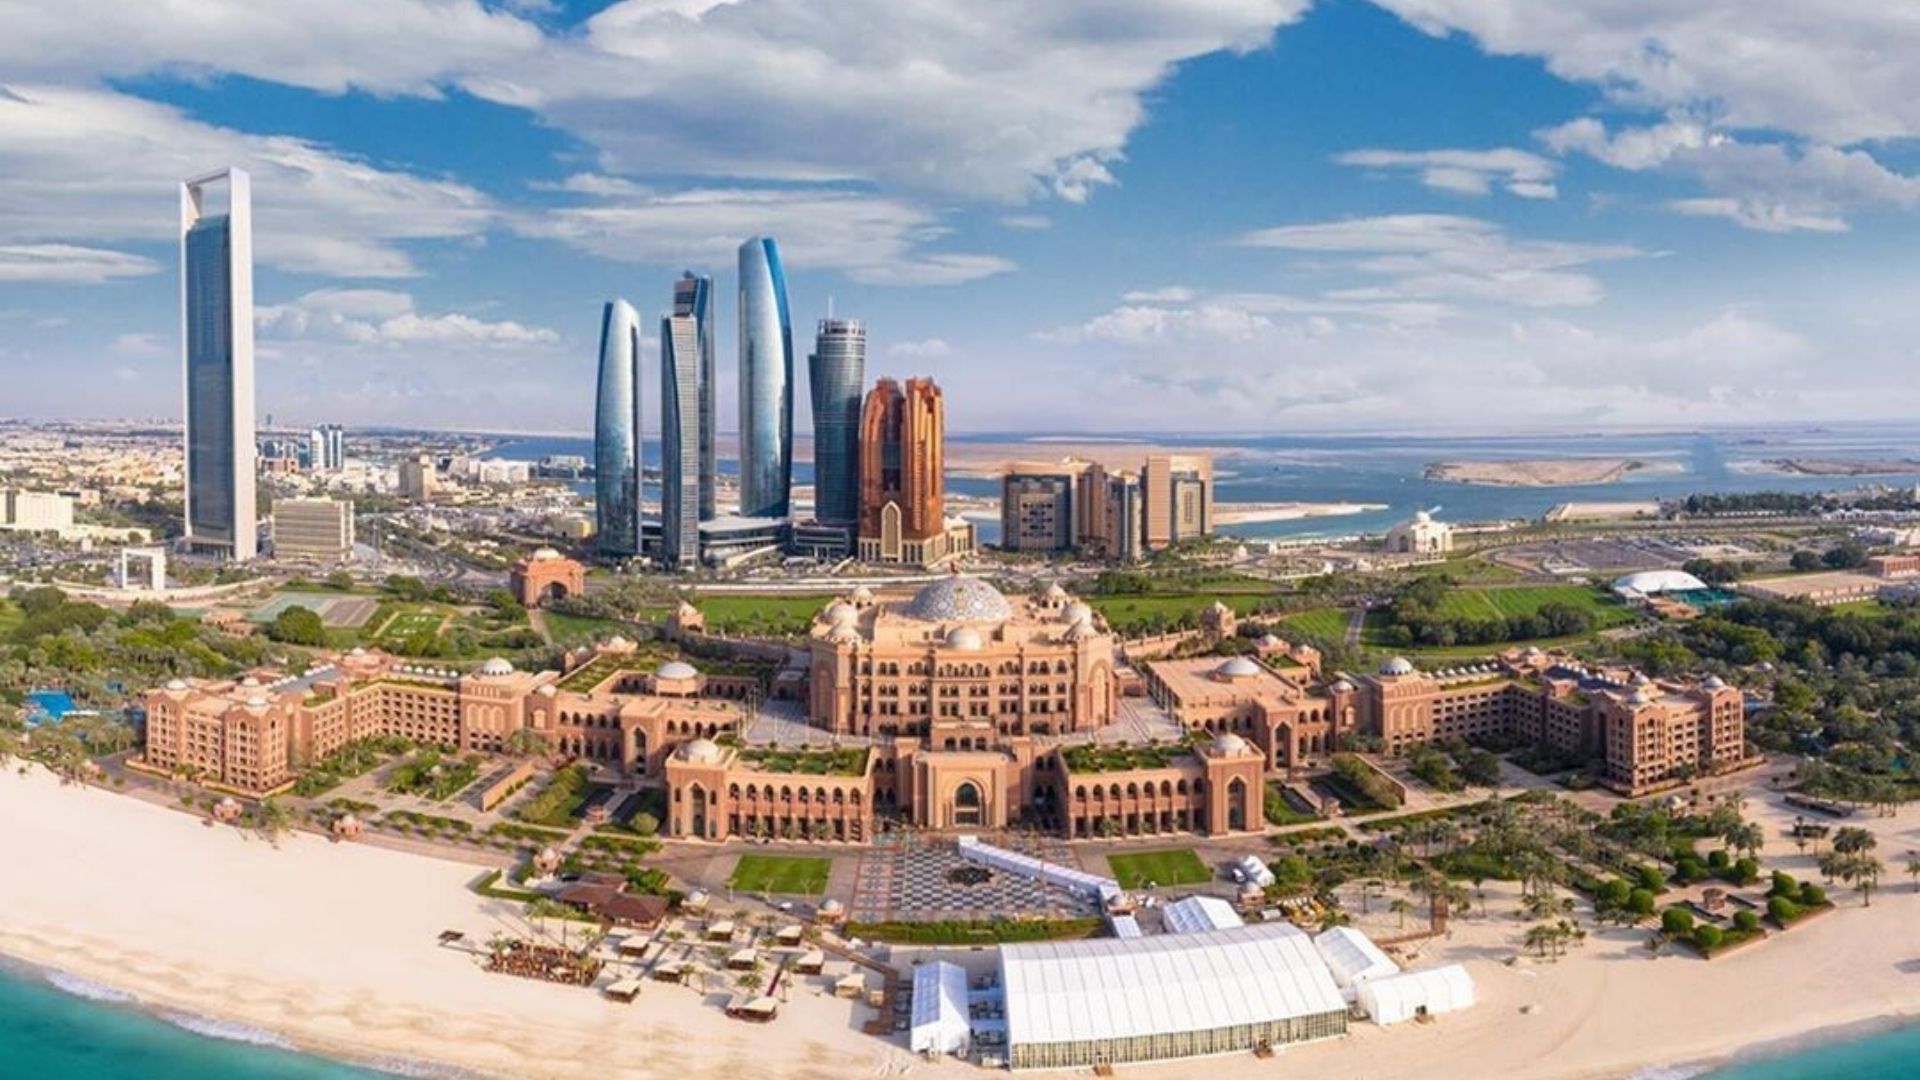 places to visit in abu dhabi 2022